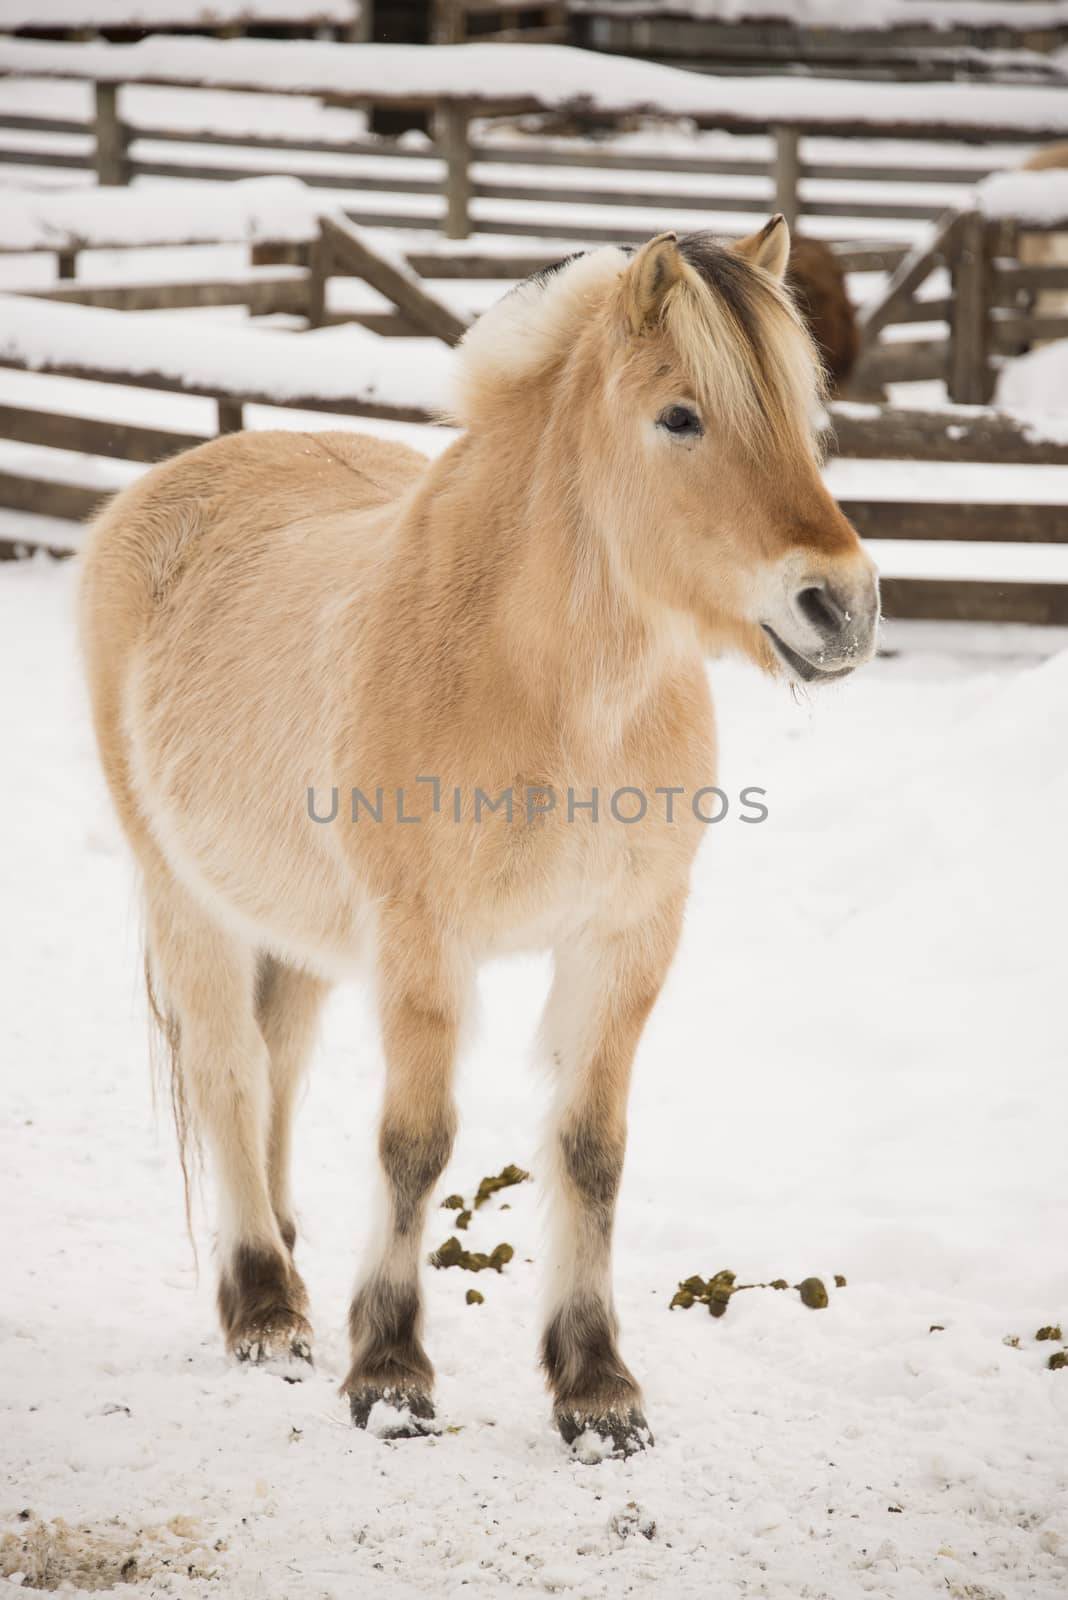 Winter and snow, and a horse in the farmyard